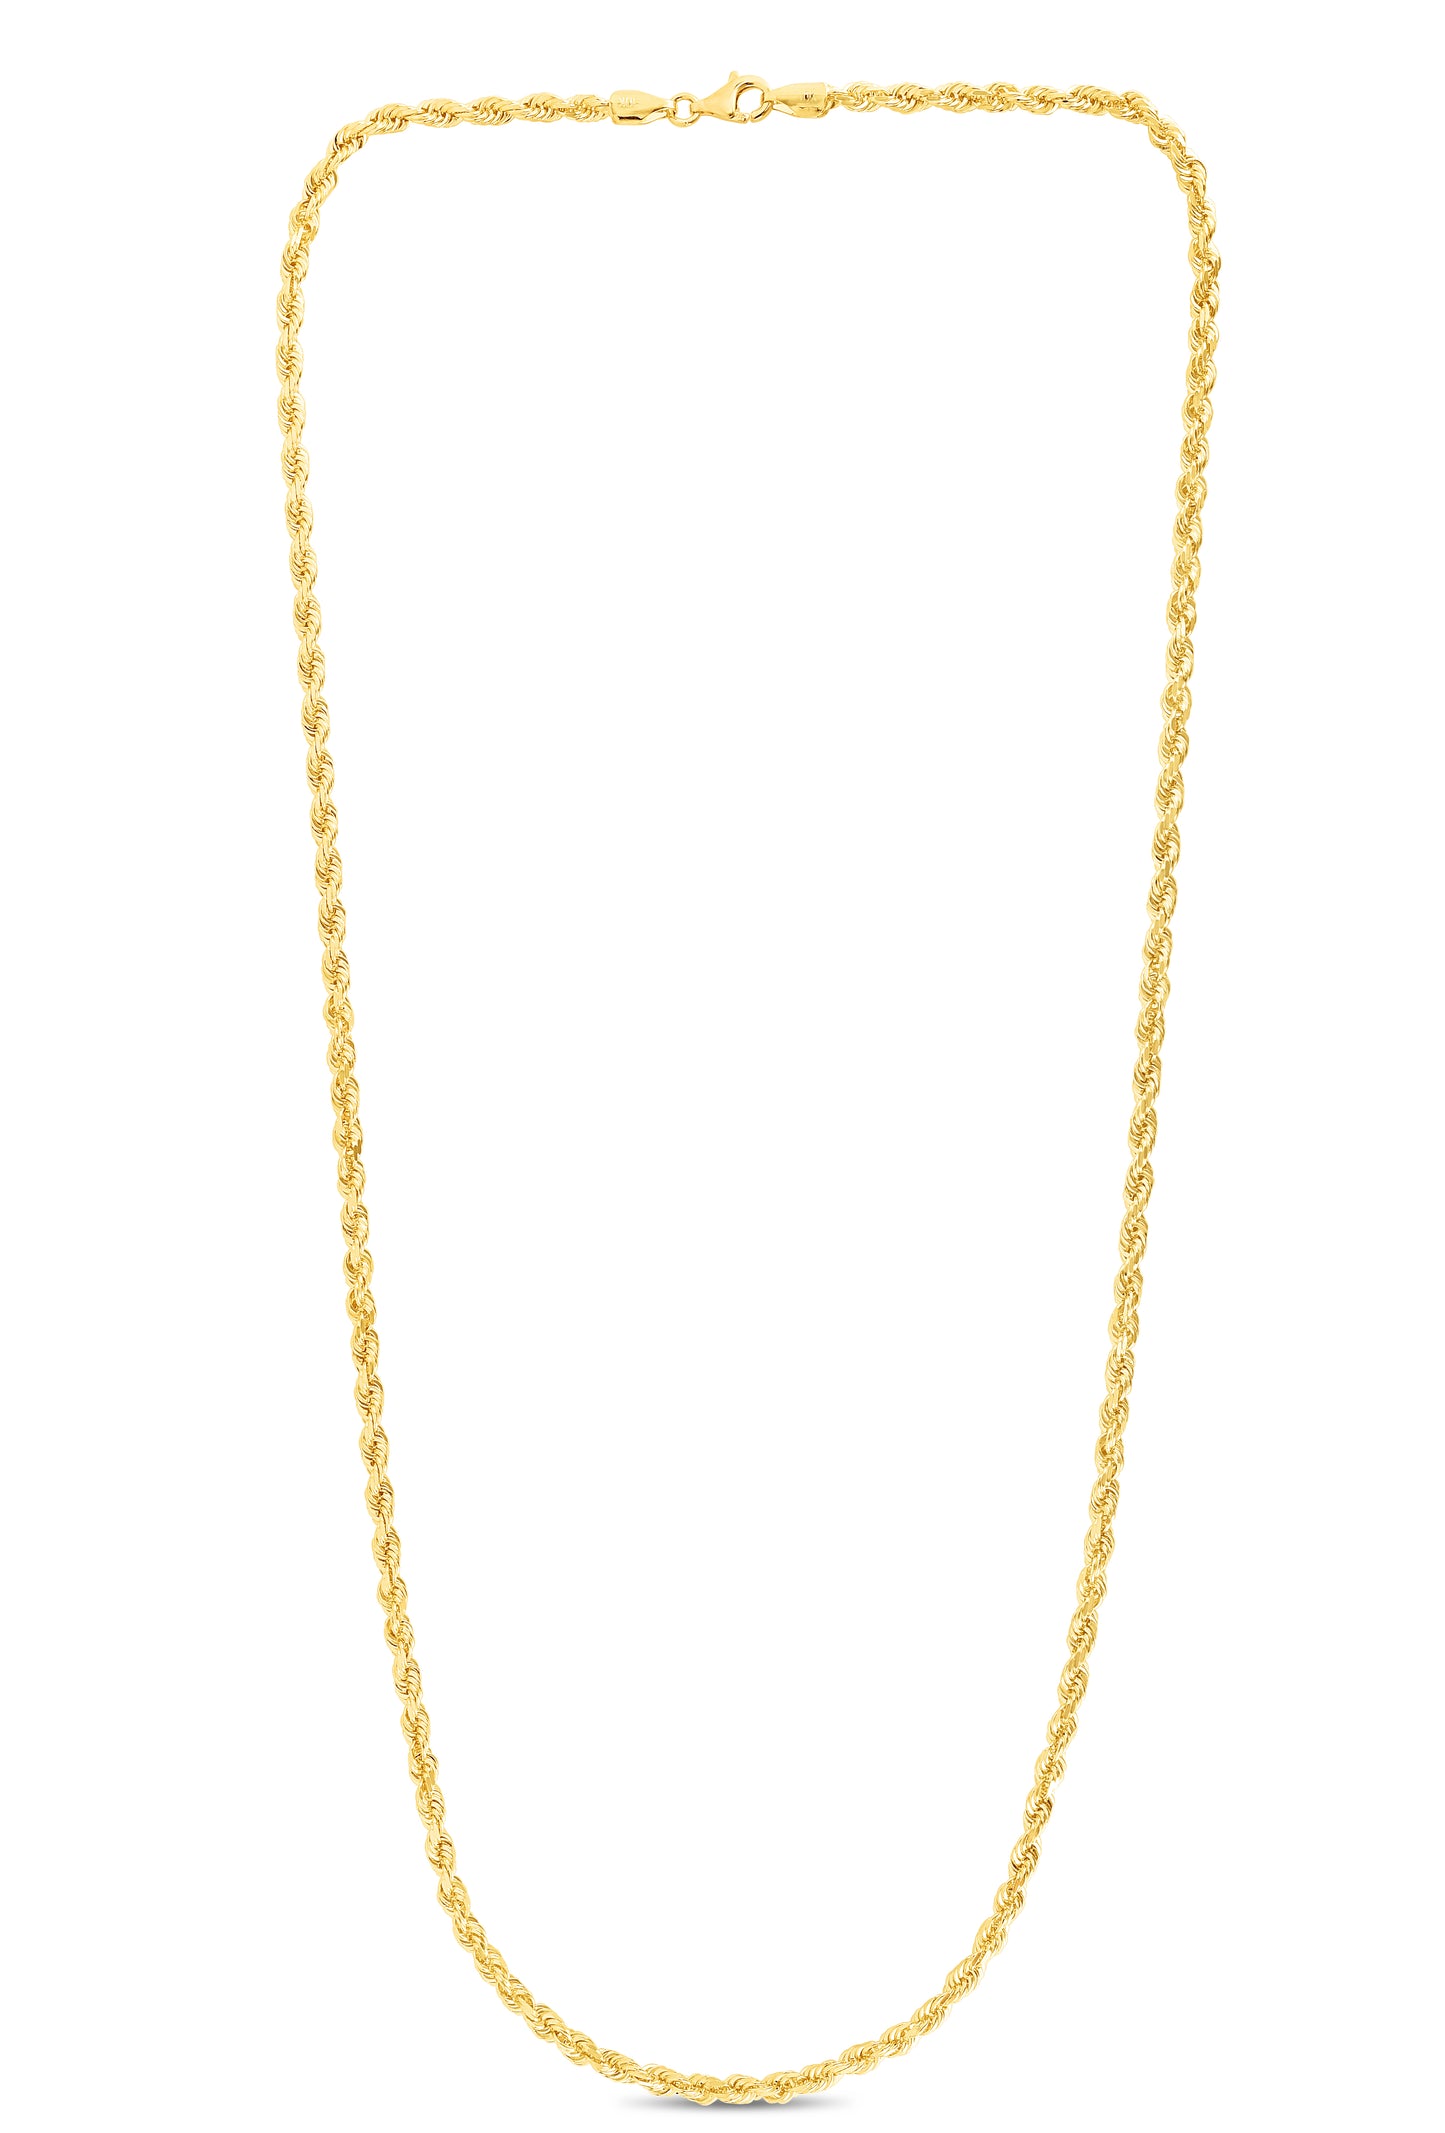 10K Gold 3.5mm Solid Diamond Cut Royal Rope Chain